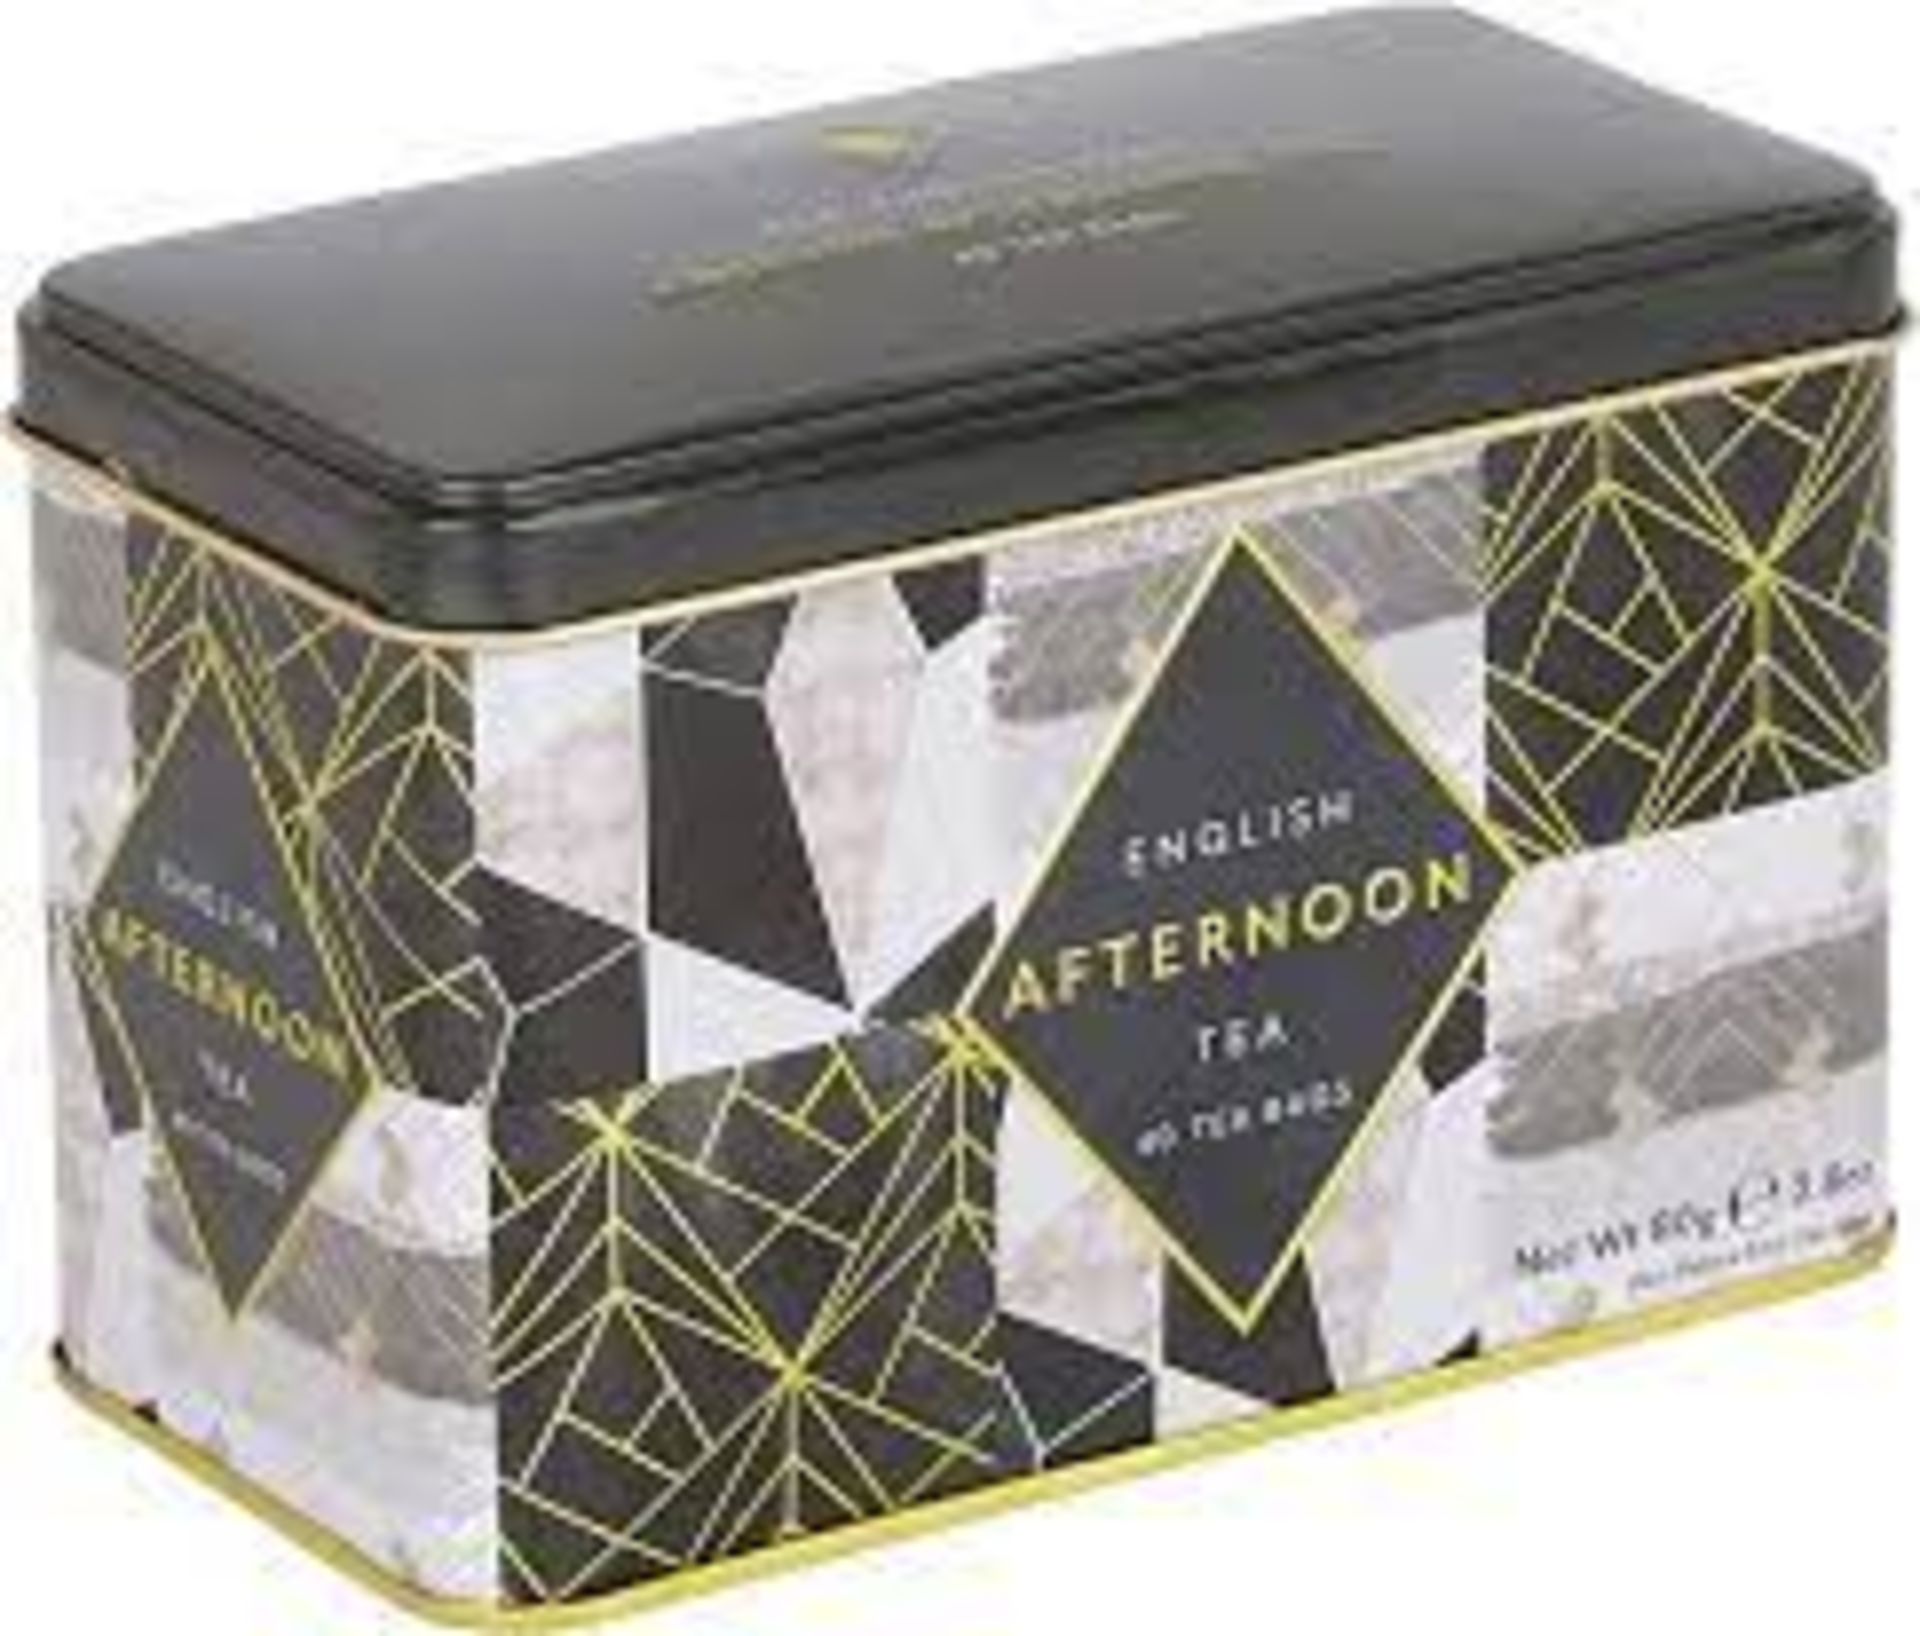 RRP £1042 (Approx. Count 45) spW57n5906p (1) 1 x New English Teas Art Deco Afternoon Tea Tin